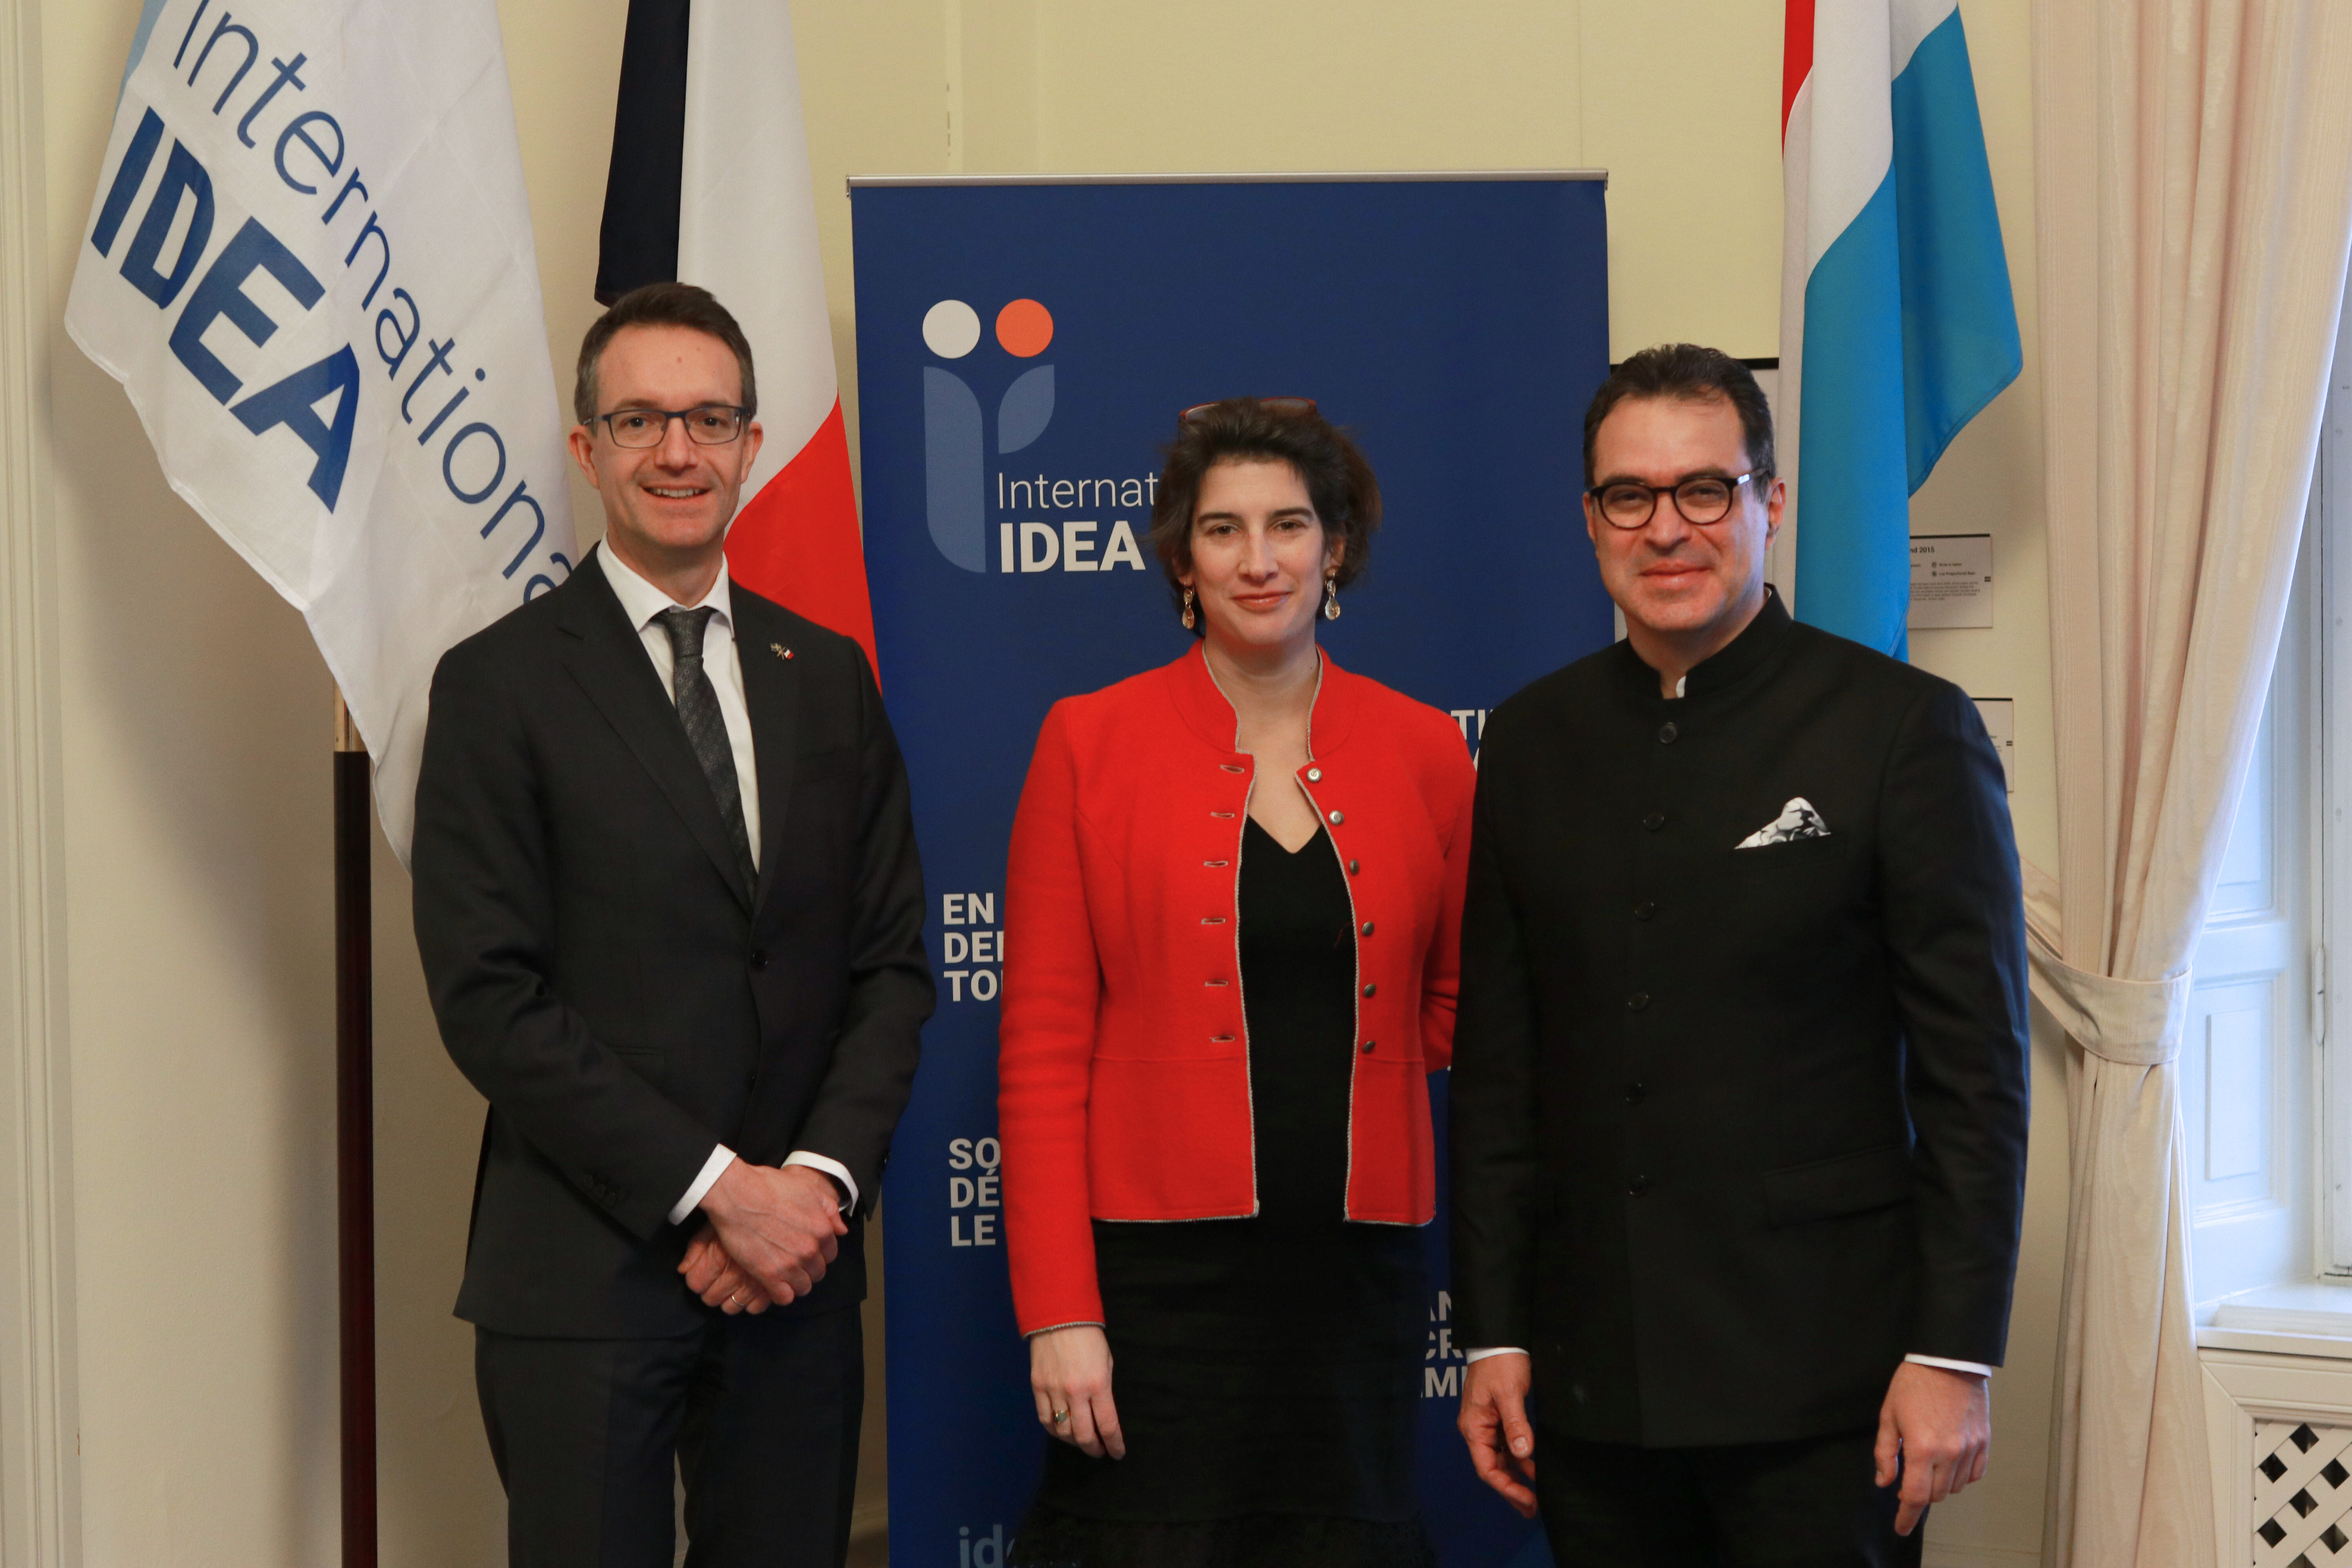 The photo shows, from left to right: French Ambassador to Sweden Etienne Le Harivel de Gonneville Clemence Weulersse, Head of the Department for Democratic Governance in France  Secretary-General Kevin Casas-Zamora, International IDEA.